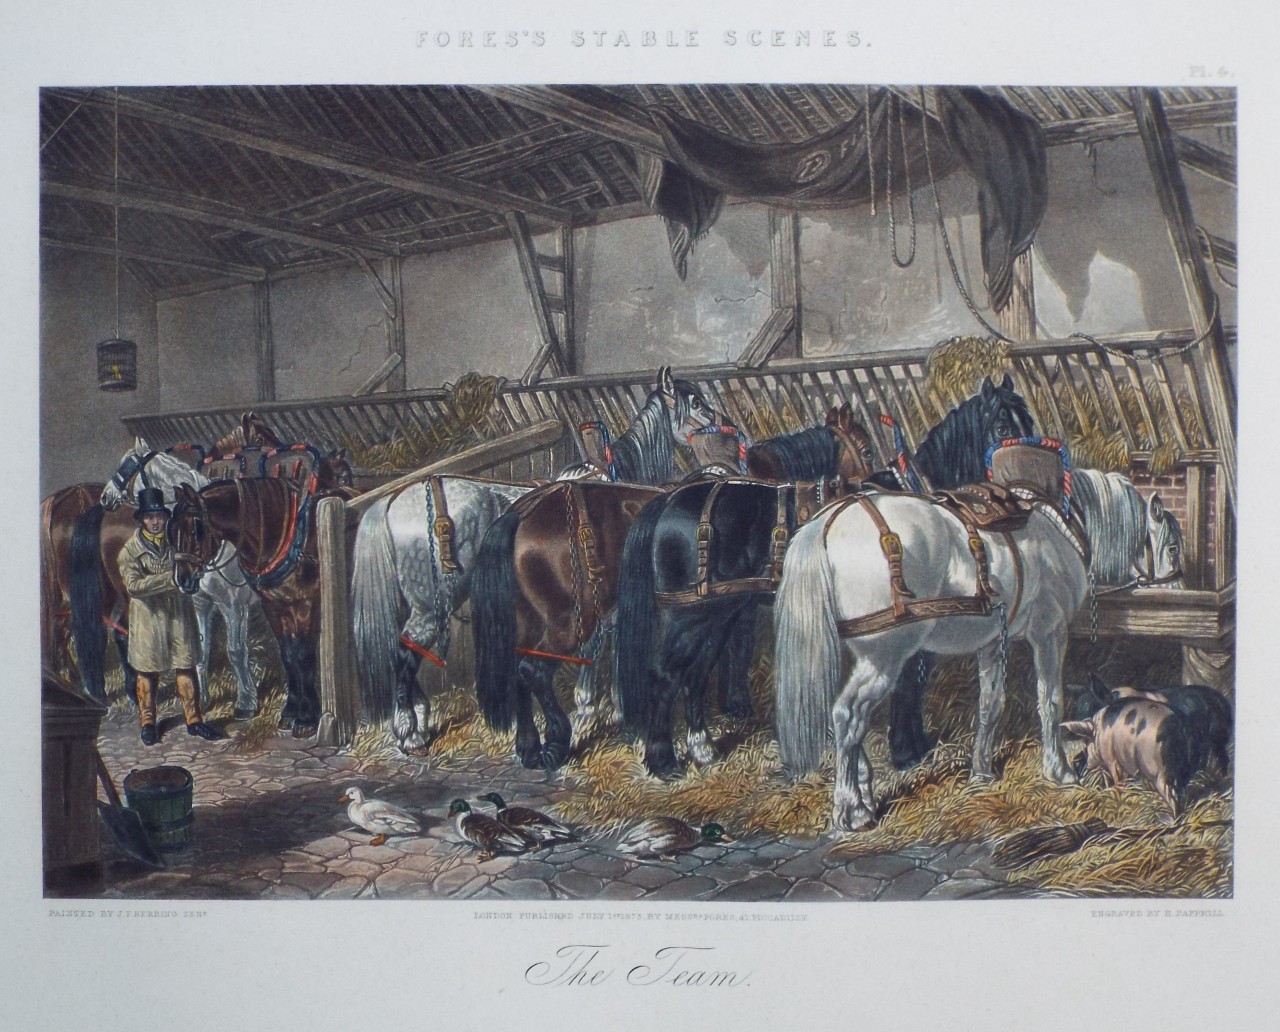 Aquatint - Fores's Stable Scenes. The Team. - Papprill